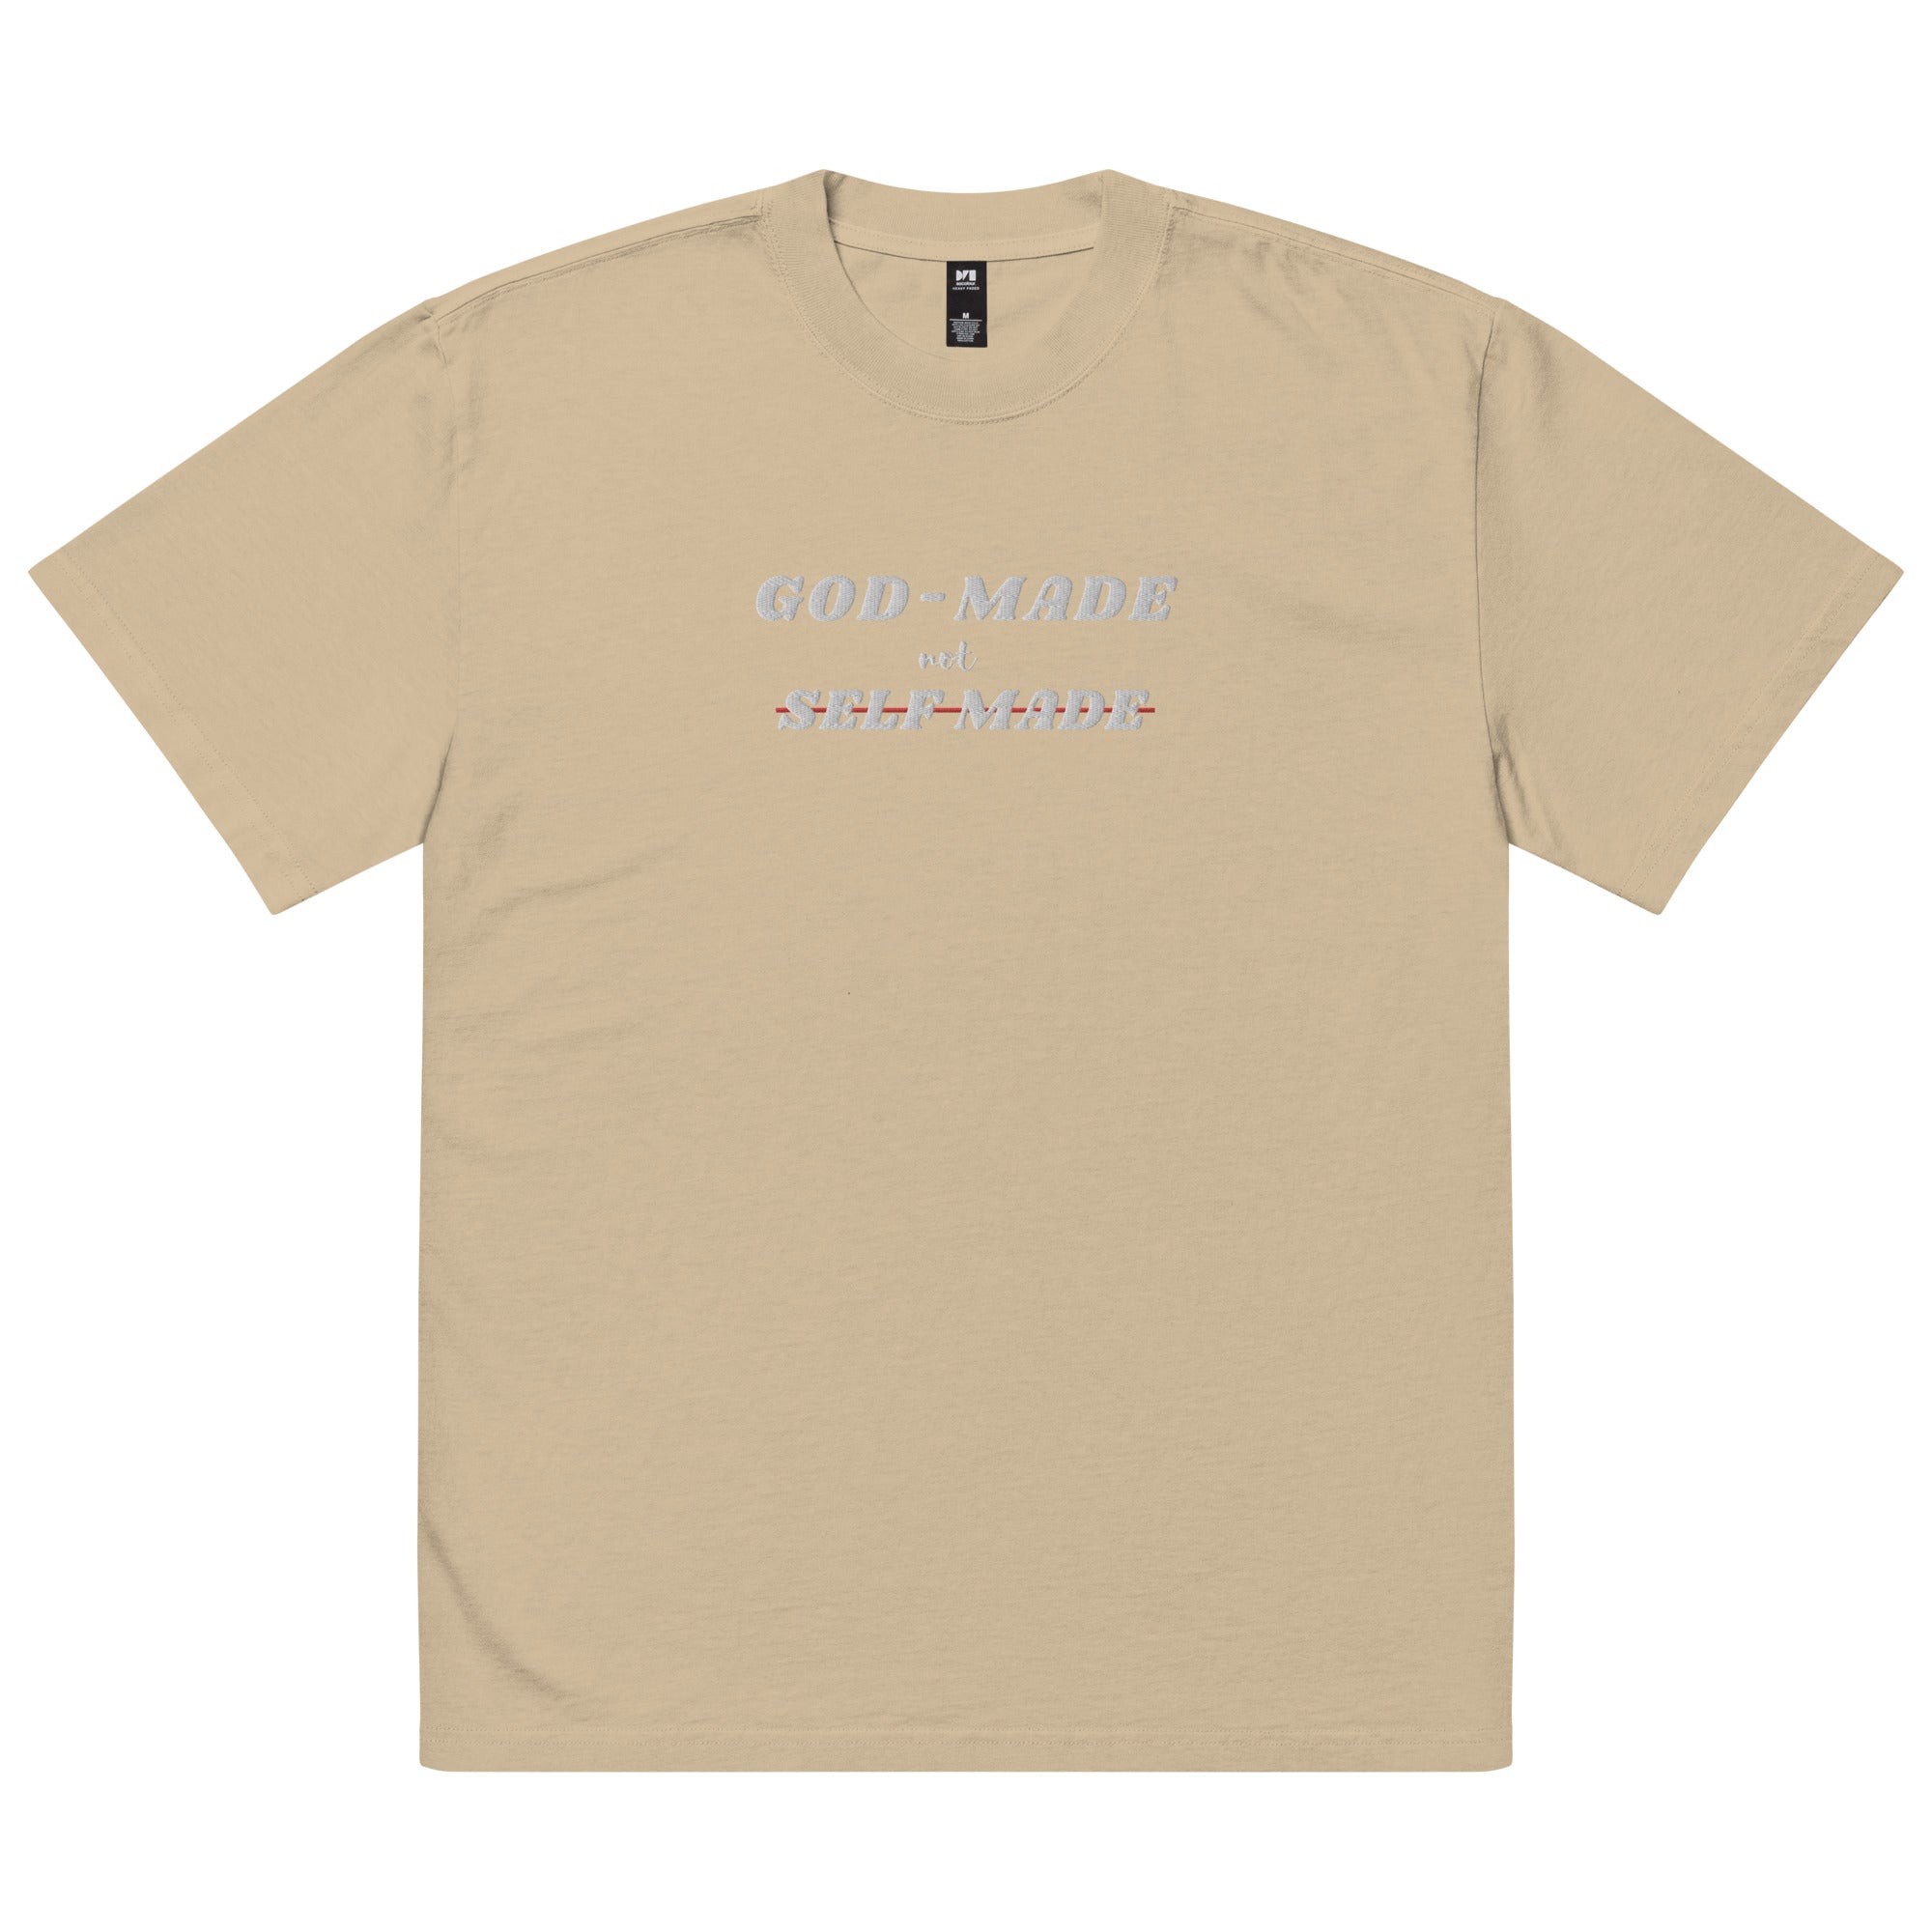 God-Made, Not Self Made Embroidered Oversized Faded T-Shirt